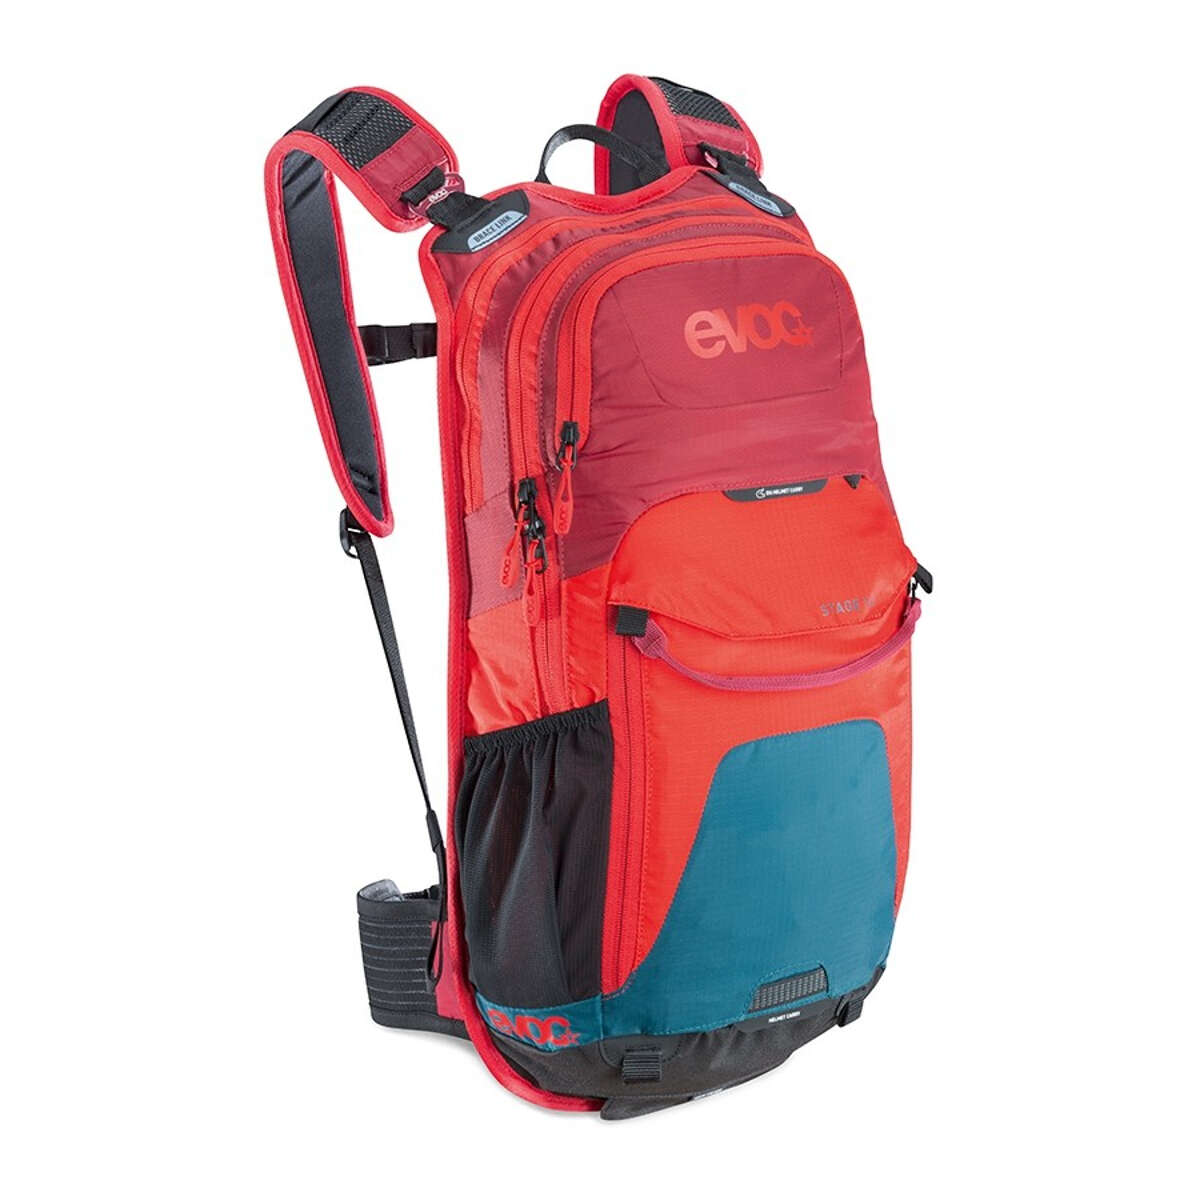 Evoc Backpack with Hydration System Compartment Stage Petrol/Red/Ruby, 12 Liter